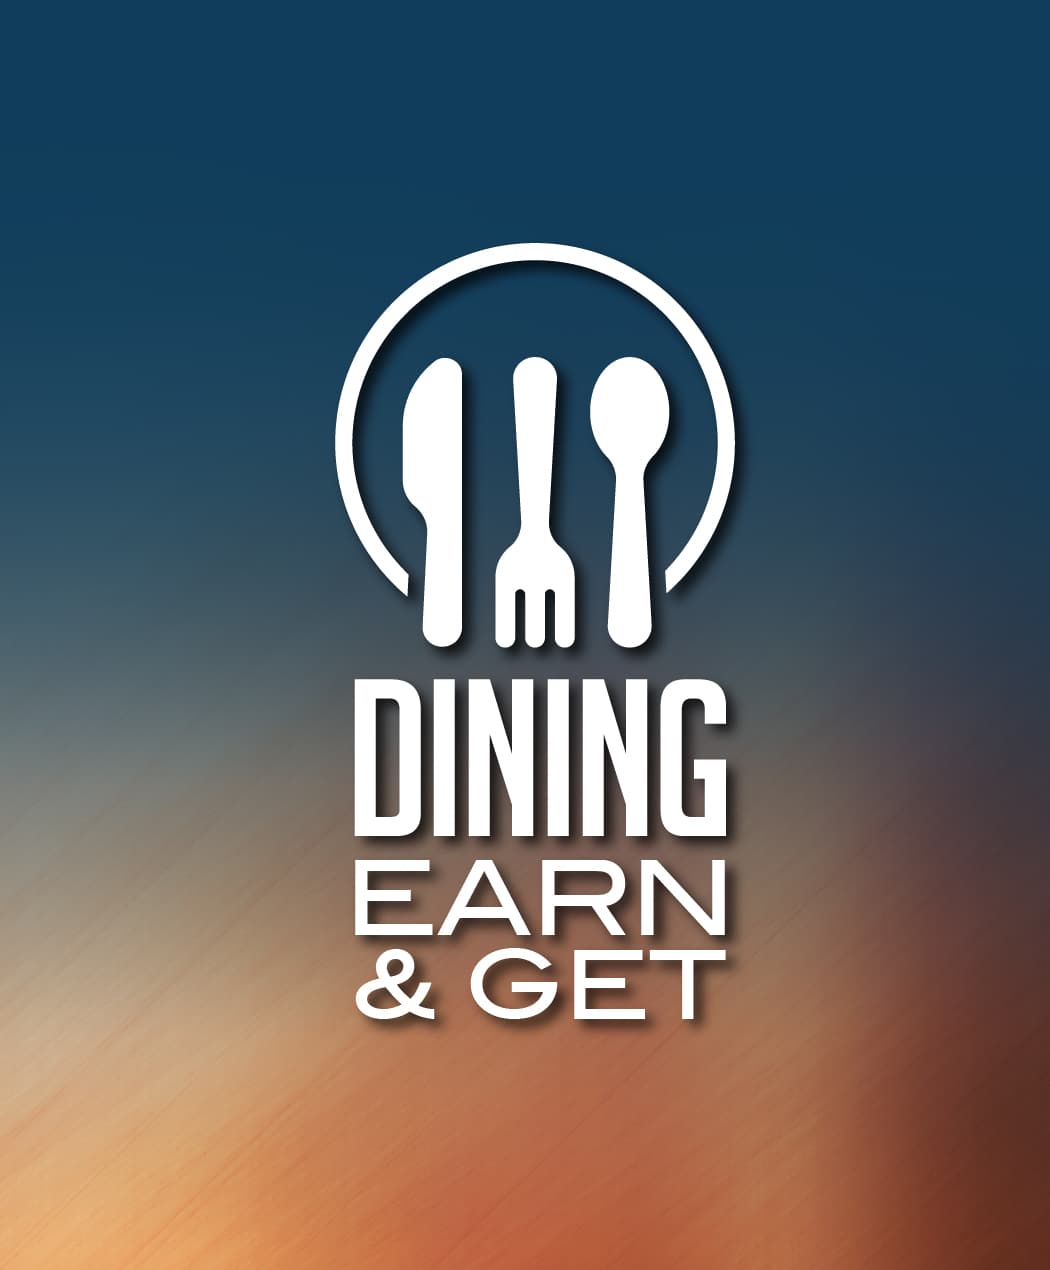 Dining Earn & Get Promotion at Point Place Casino